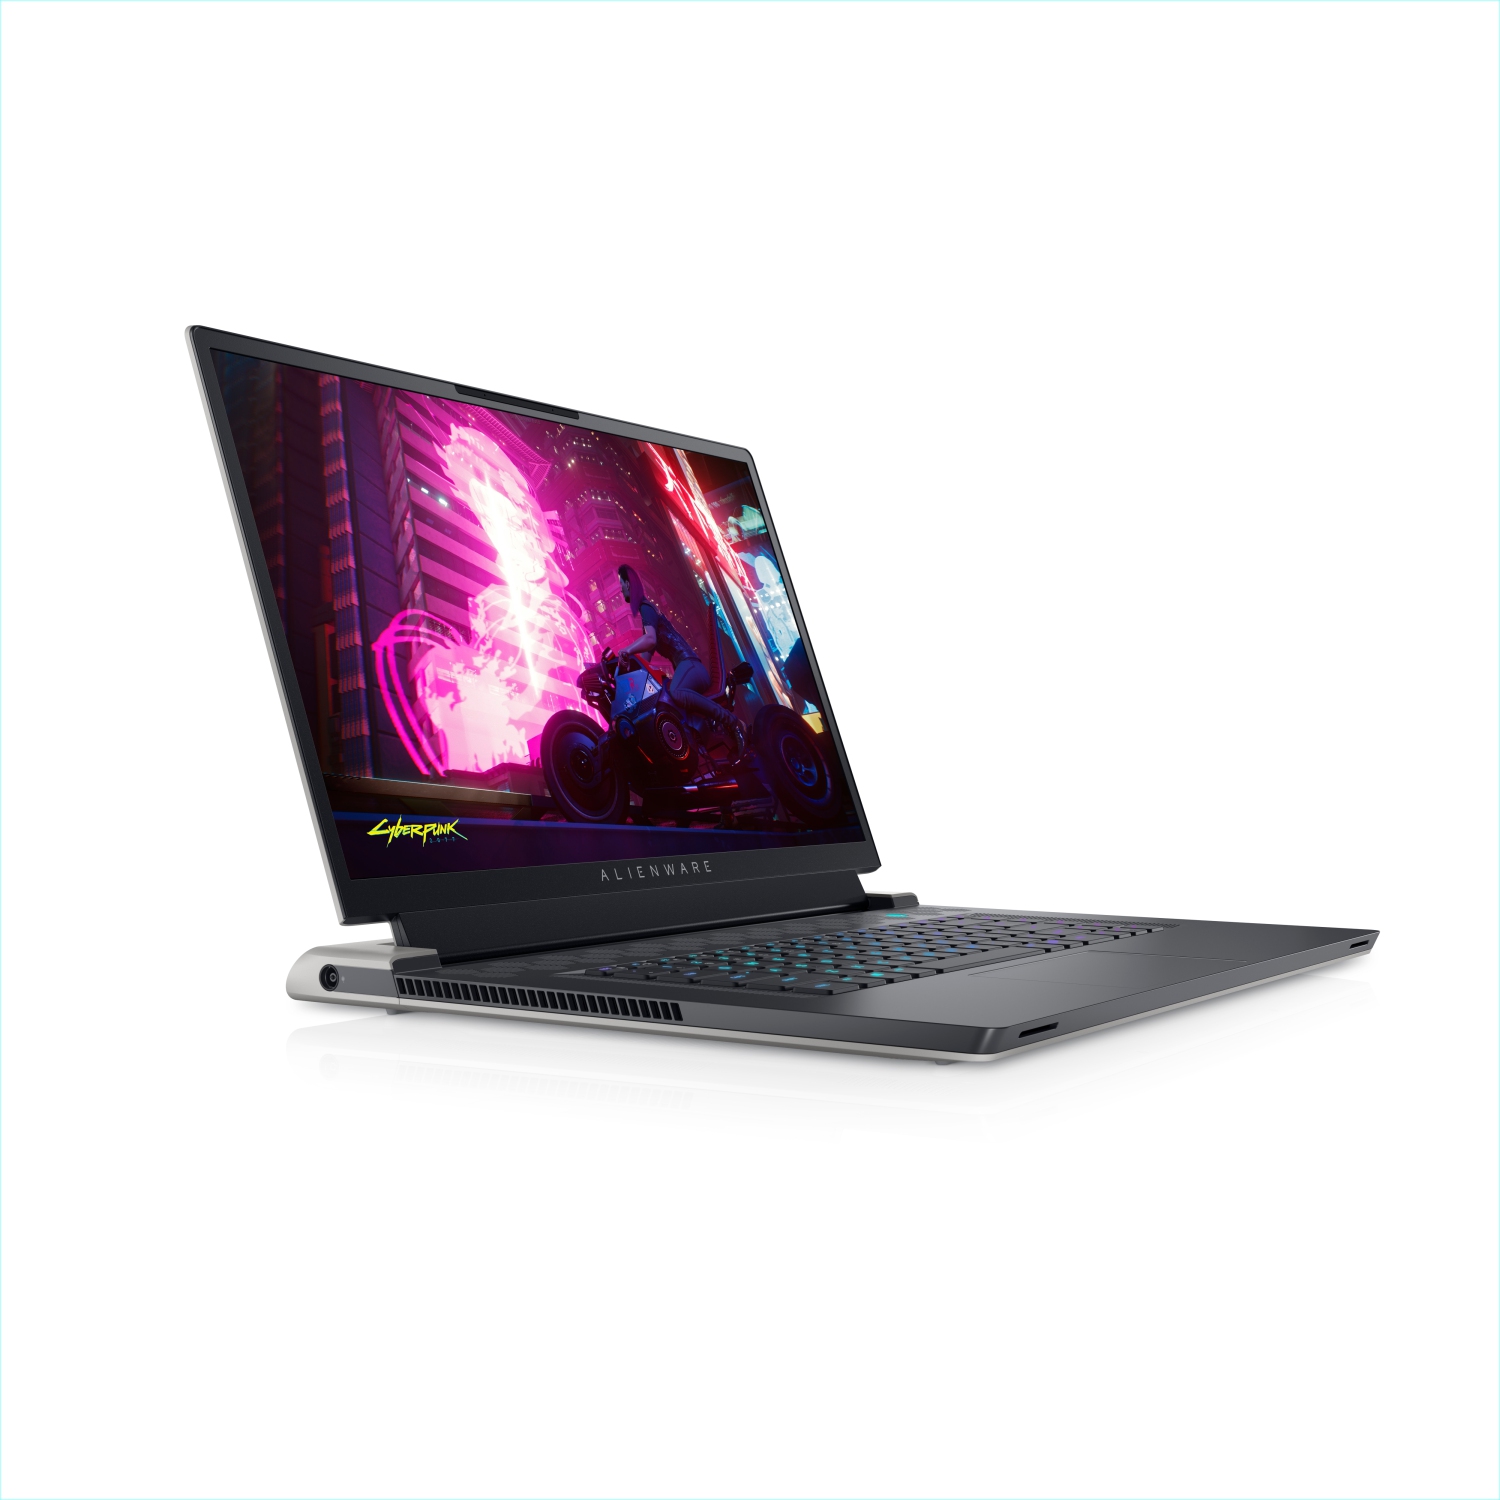 Refurbished (Excellent) - Dell Alienware X17 R1 Gaming Laptop (2021), 17.3" 4K, Core i9, 1TB SSD, 64GB RAM, RTX 3080, 8 Cores @ 5 GHz, 11th Gen CPU Certified Refurbished